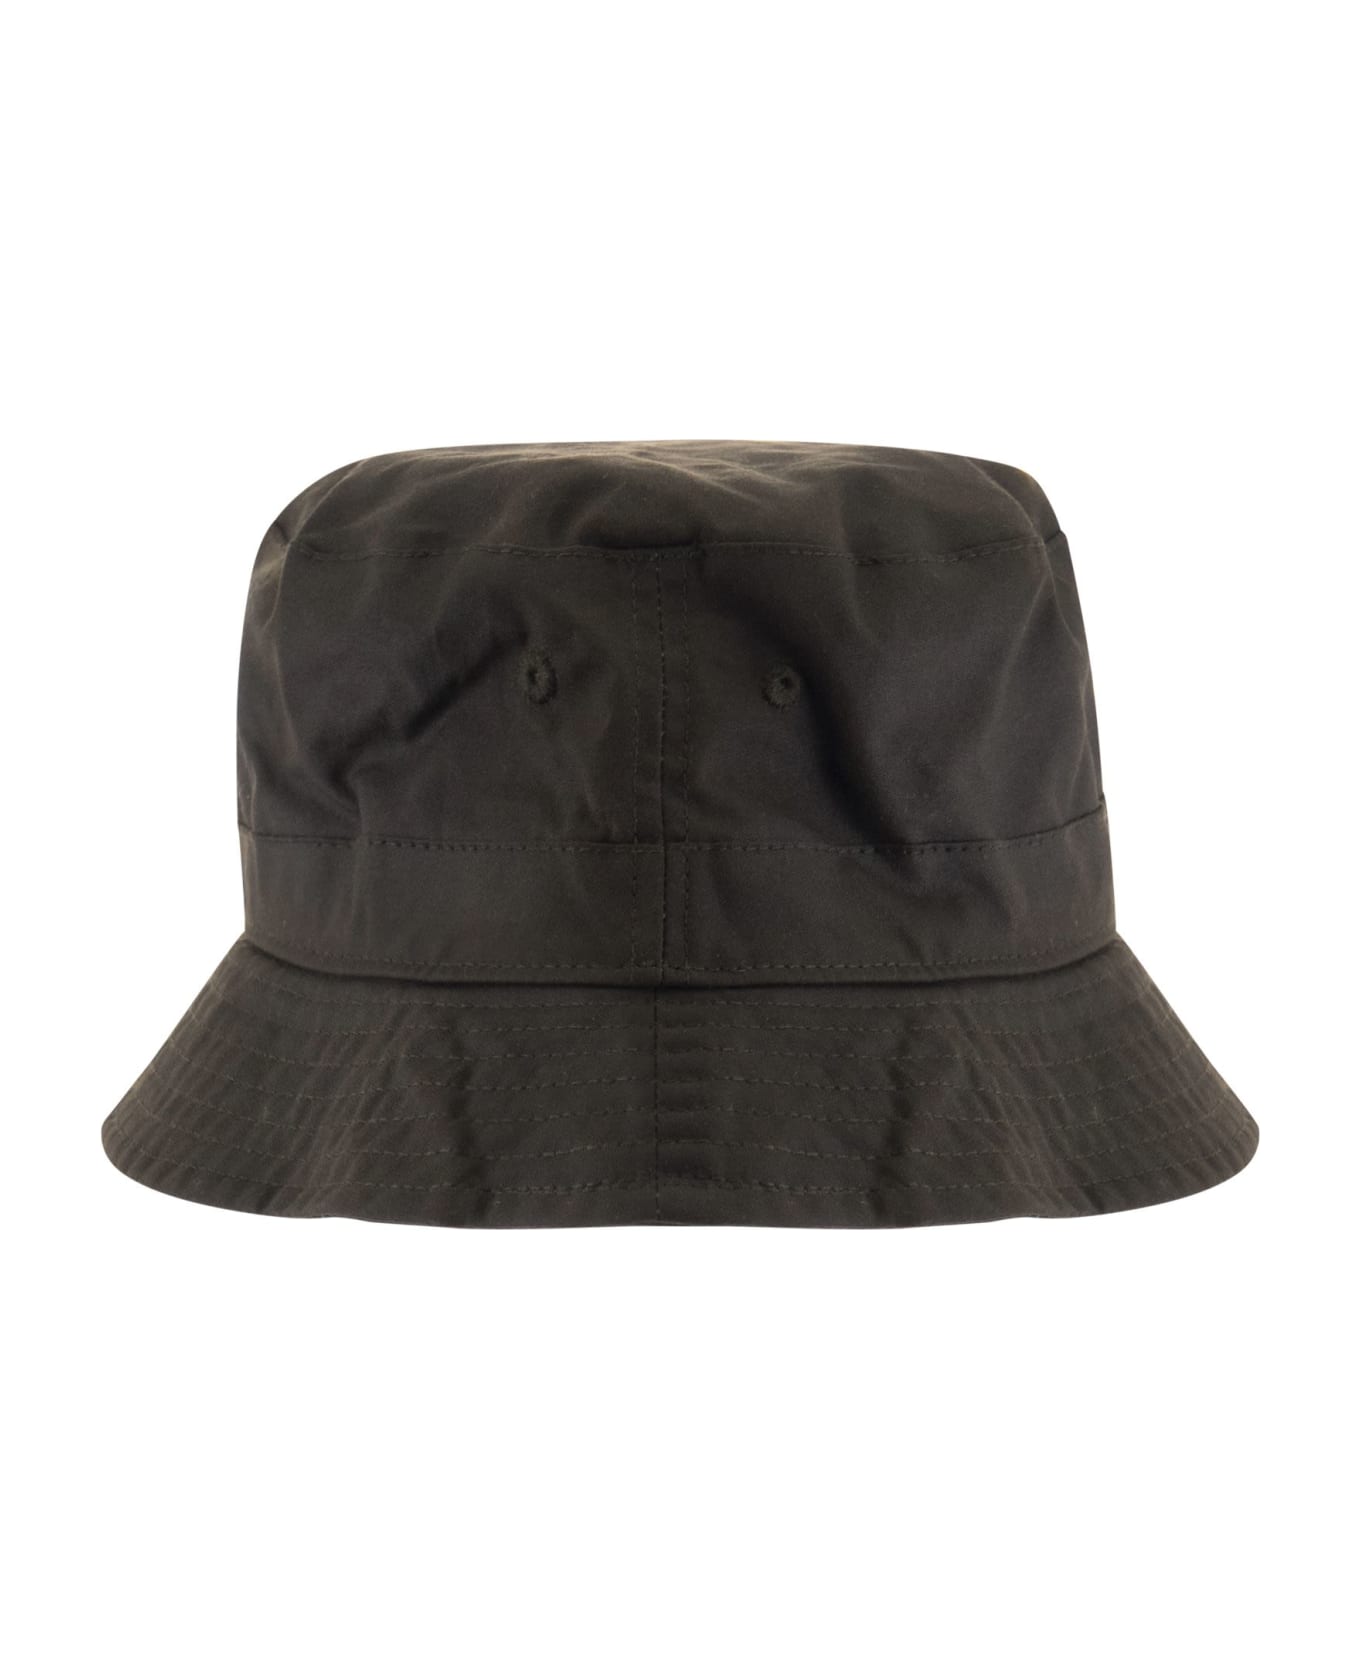 Barbour Belsay Waxed Cap - Olive